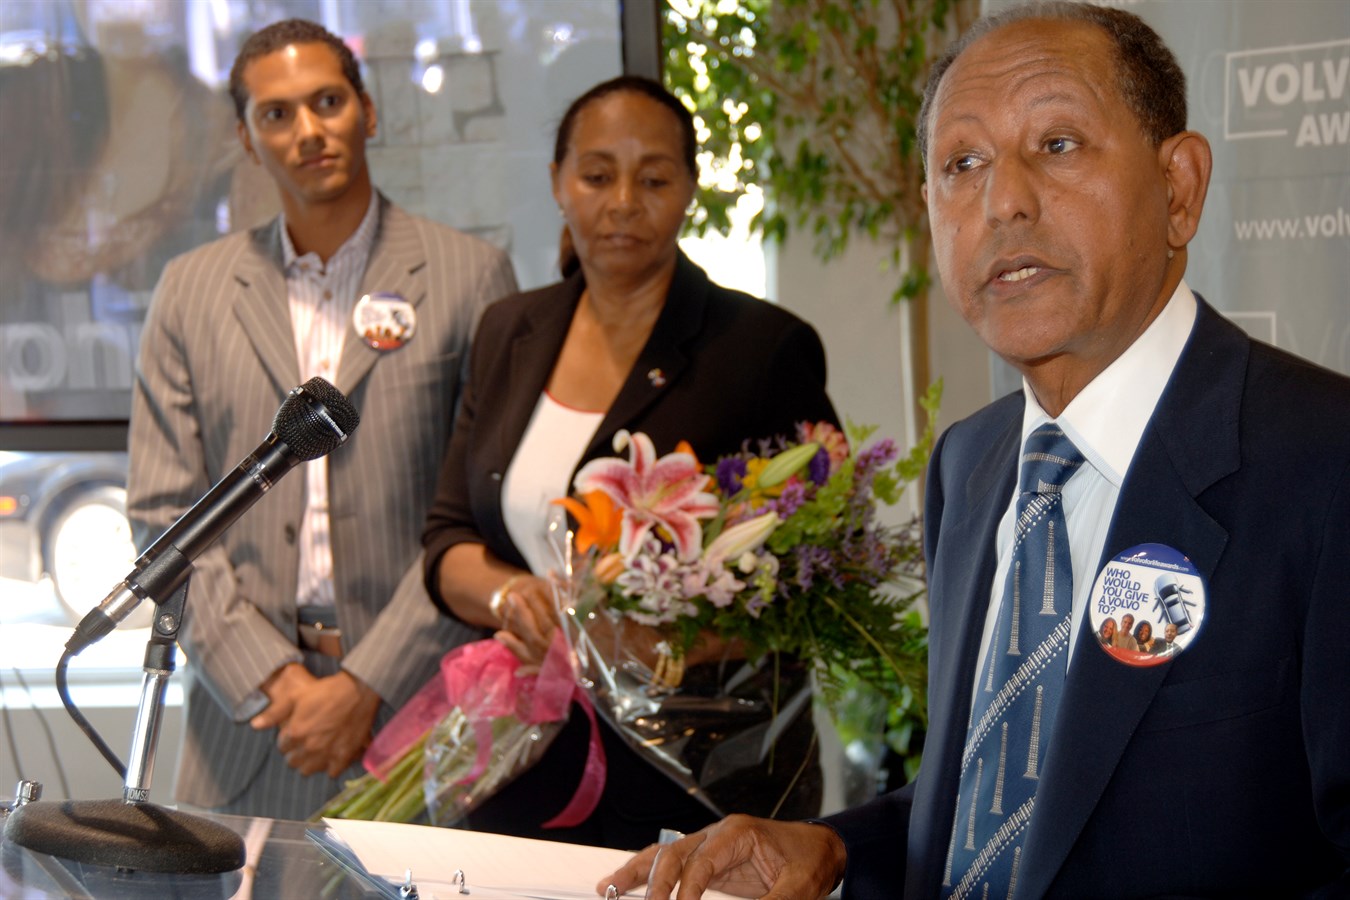 Dr. Asfaw - Volvo for life Awards